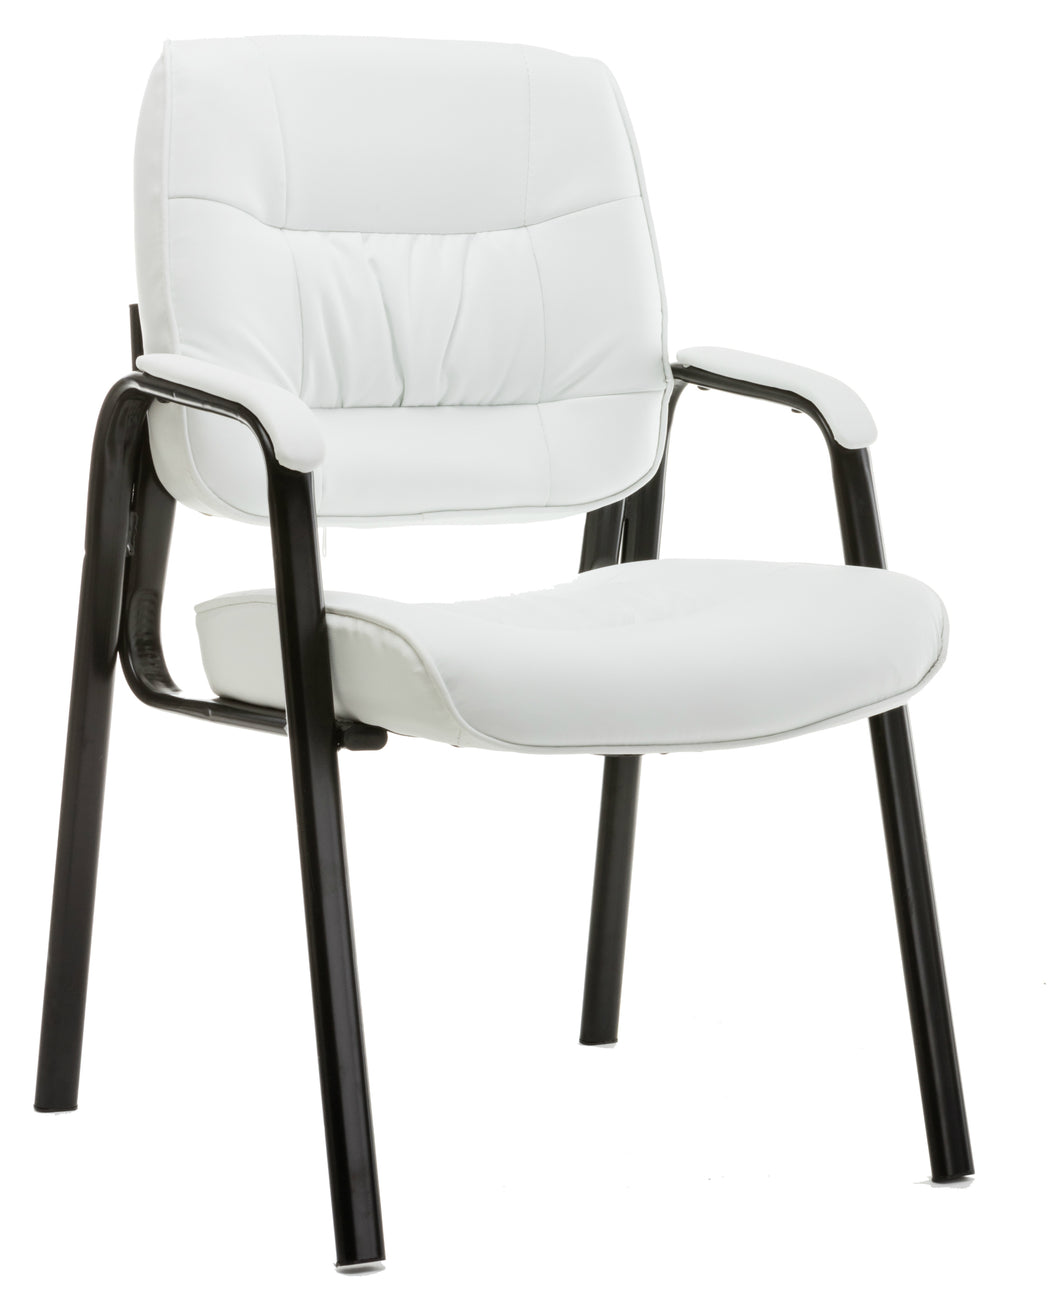 BTEXPERT Leather Chair Reception Side Conference Waiting Room Guest Chair White